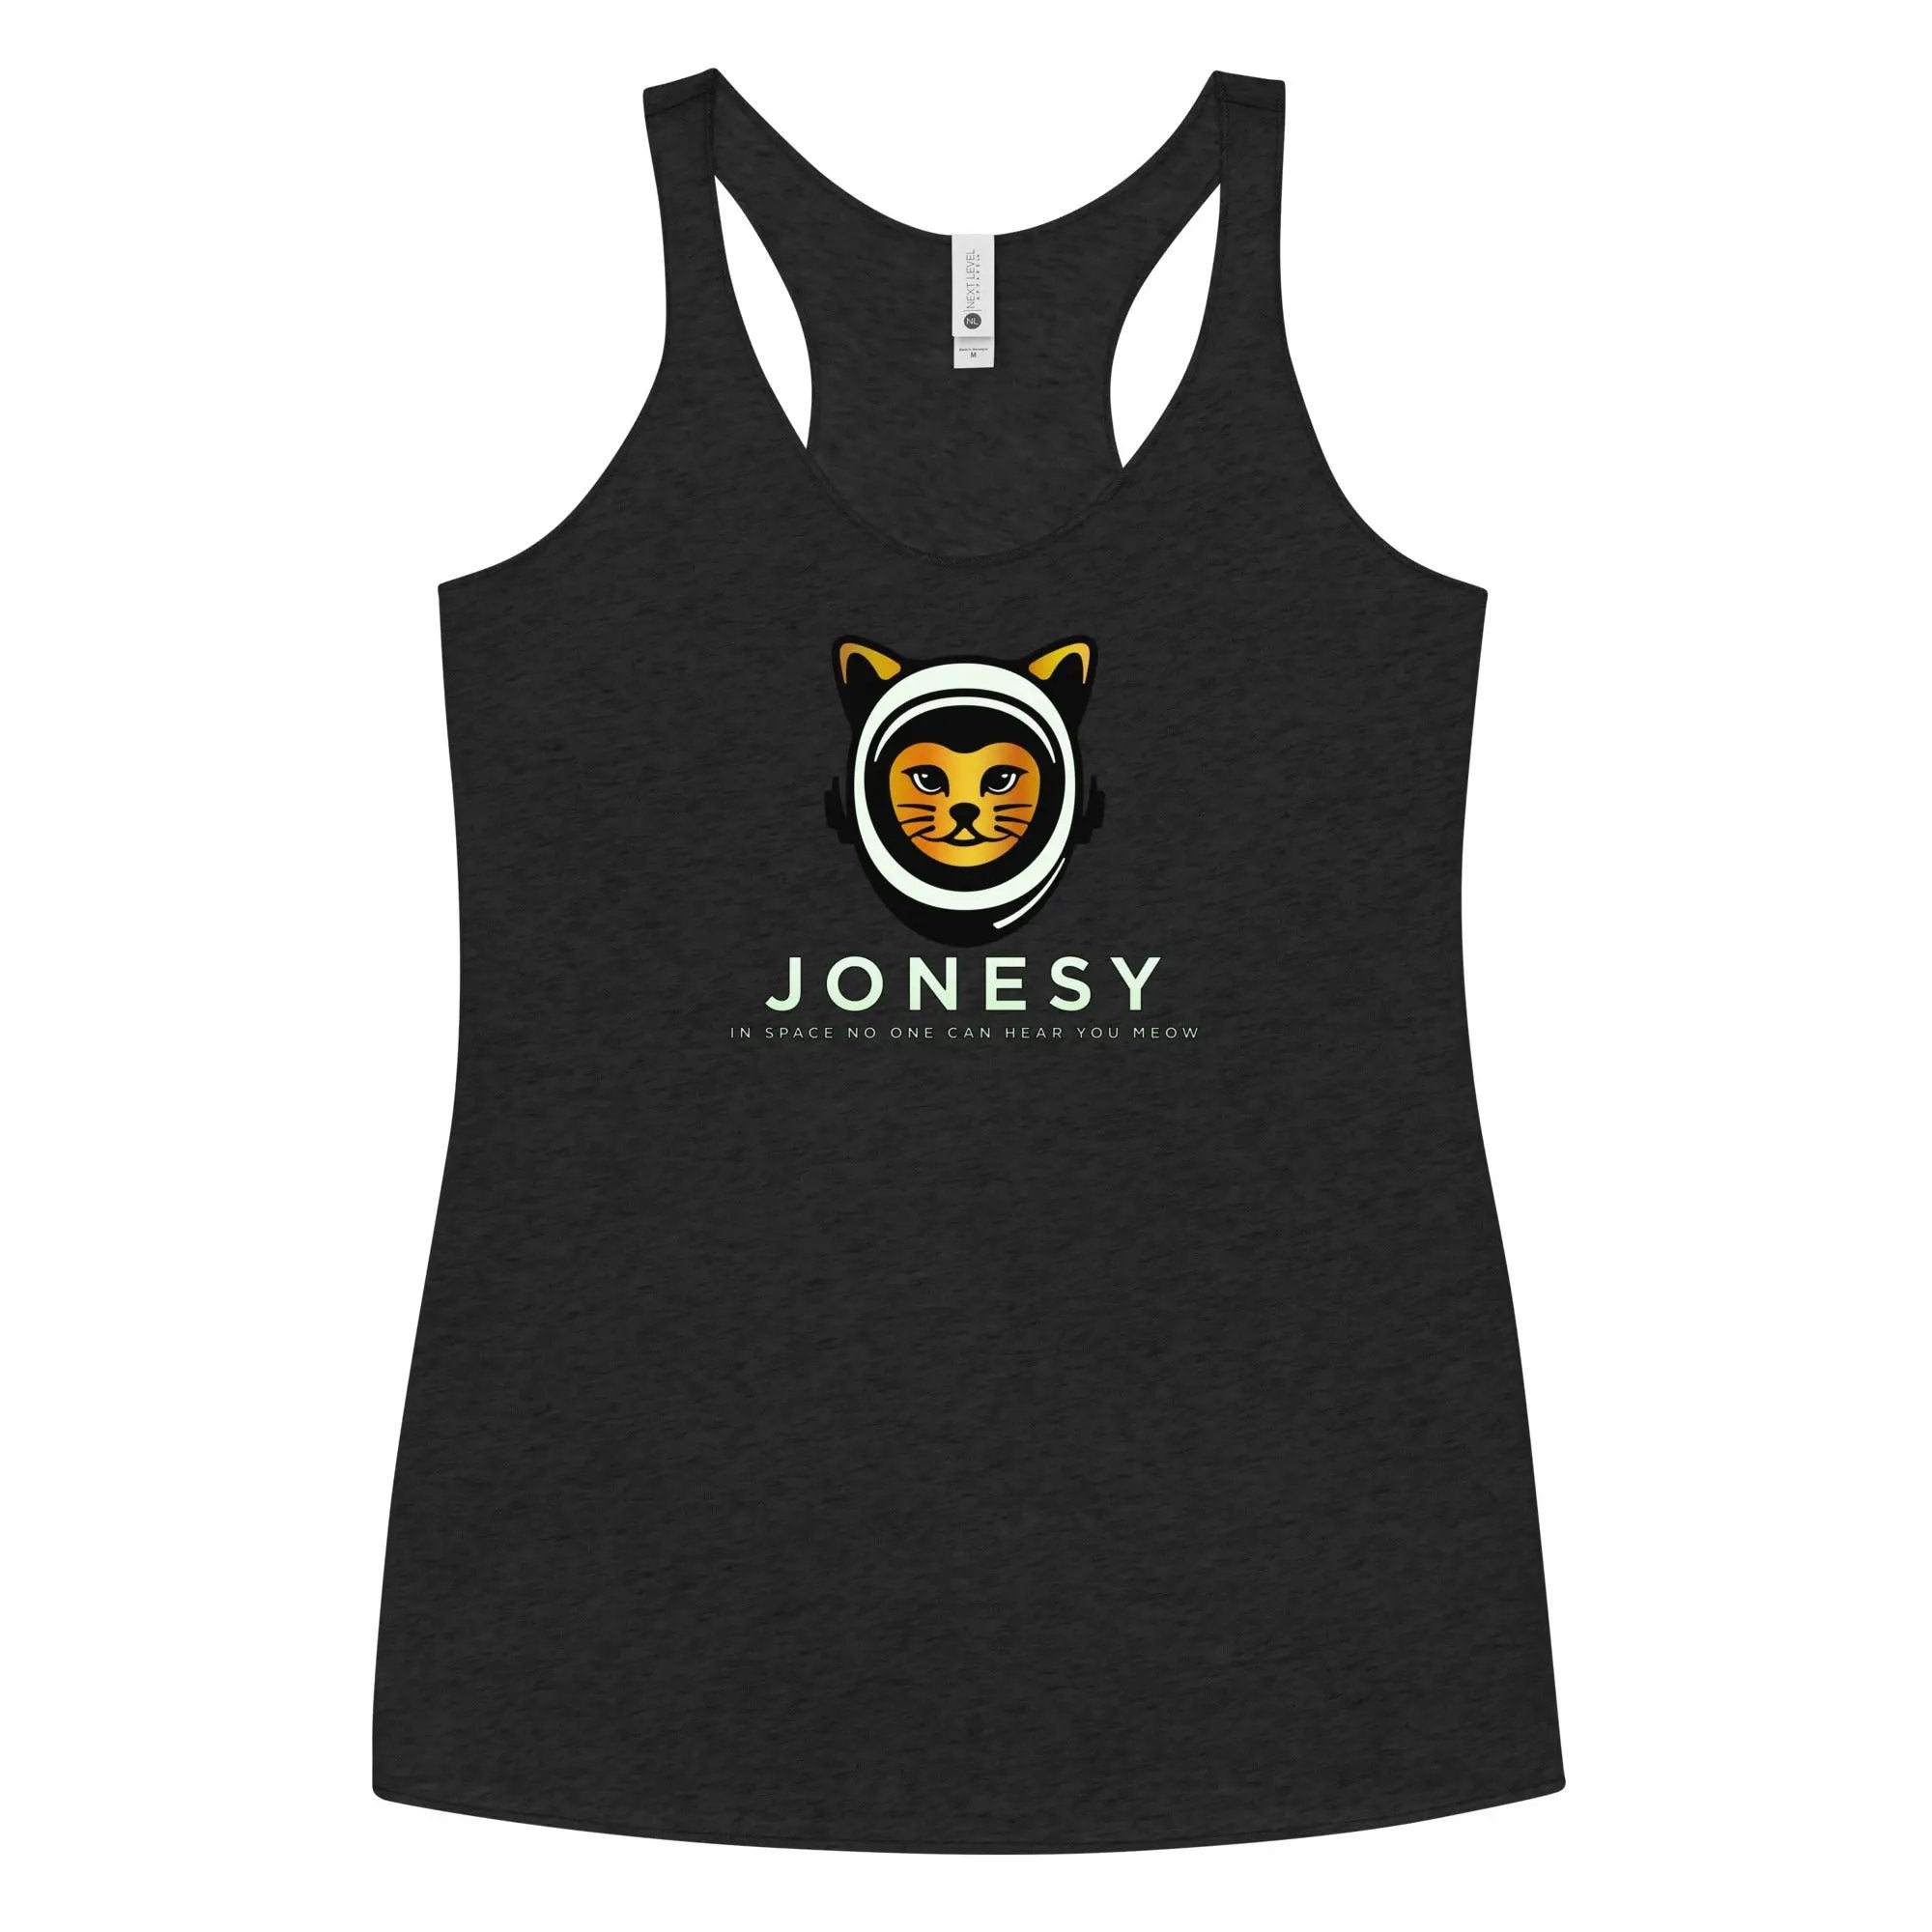 a women's tank top with a logo on it